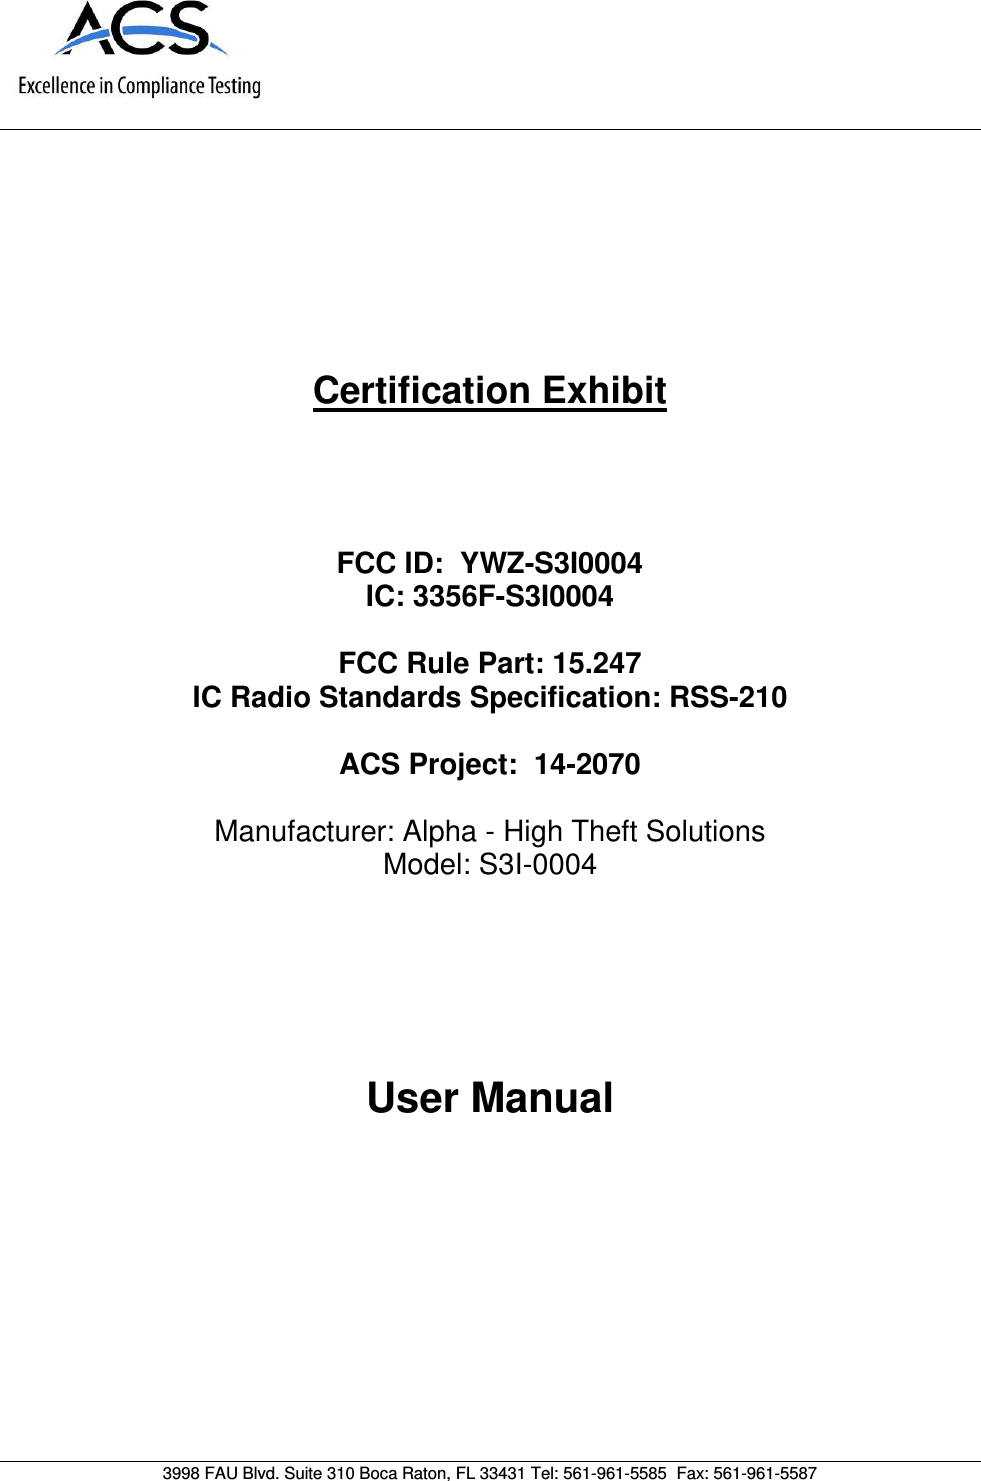      Certification Exhibit     FCC ID:  YWZ-S3I0004 IC: 3356F-S3I0004  FCC Rule Part: 15.247 IC Radio Standards Specification: RSS-210  ACS Project:  14-2070   Manufacturer: Alpha - High Theft Solutions Model: S3I-0004     User Manual   3998 FAU Blvd. Suite 310 Boca Raton, FL 33431 Tel: 561-961-5585  Fax: 561-961-5587 